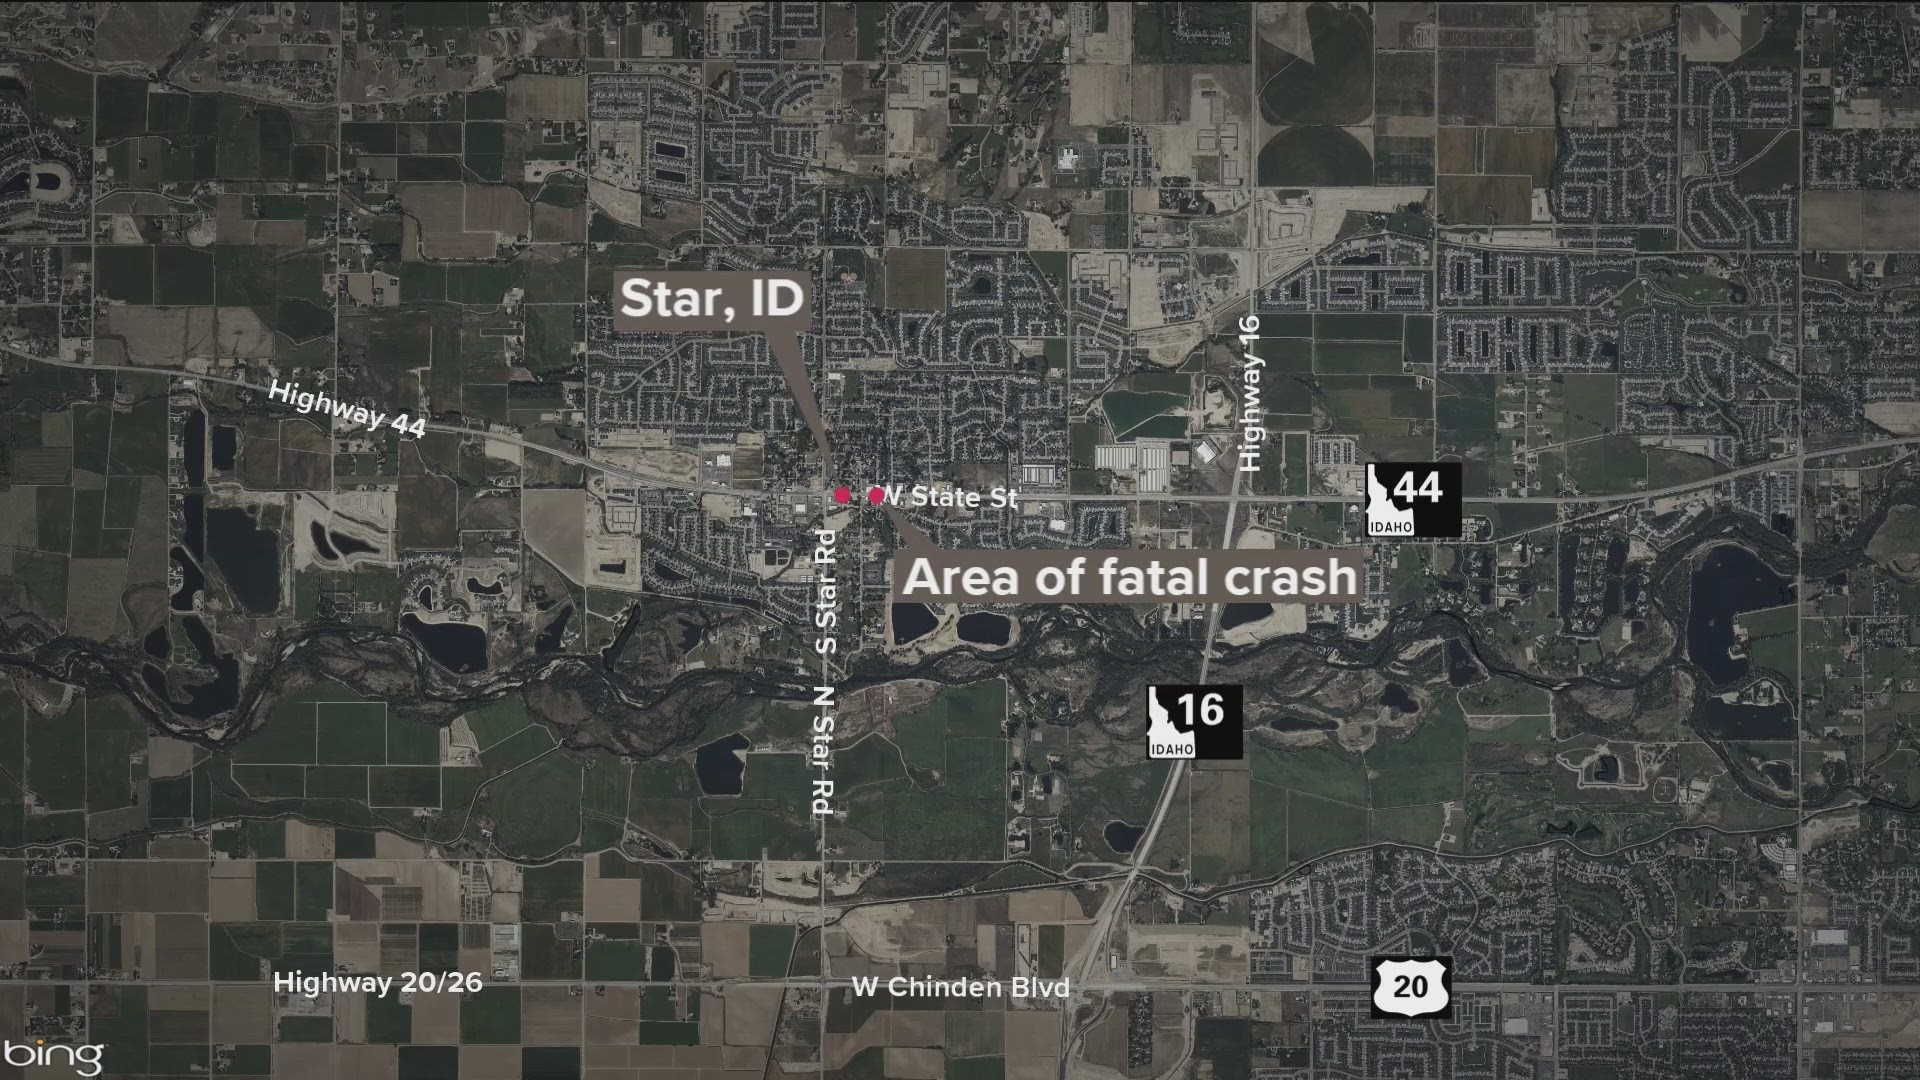 The Ada County Coroner's Office on Wednesday identified the 56-year-old who died following a collision between a motorcycle and passenger car Monday in Star.